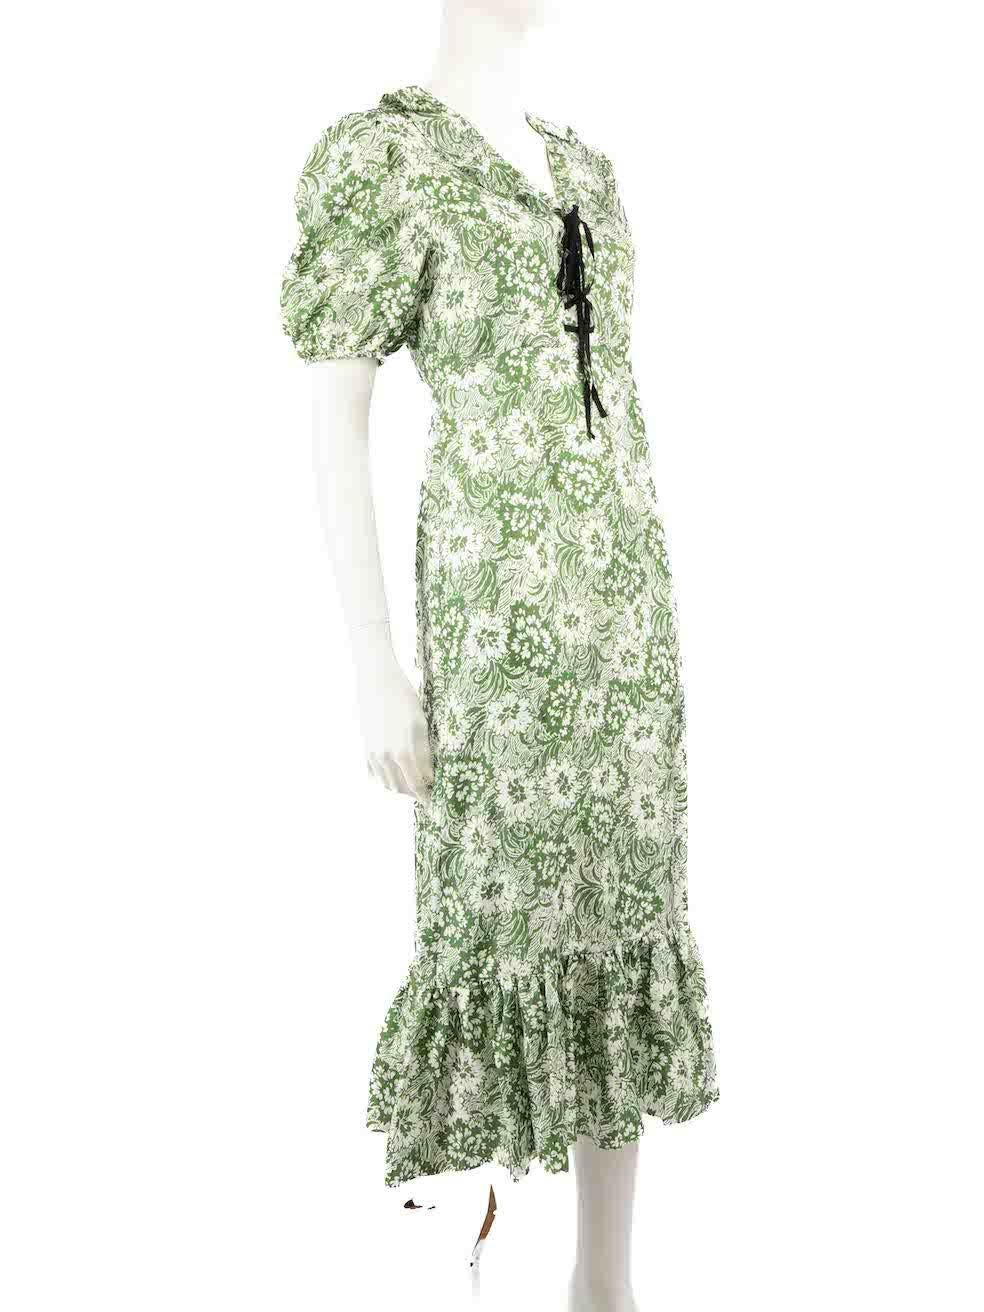 CONDITION is Very good. Hardly any visible wear to dress is evident on this used Shrimps designer resale item.
 
 
 
 Details
 
 
 Green
 
 Silk
 
 Dress
 
 Floral print
 
 Midi
 
 Short puff sleeves
 
 Ruffle collar
 
 Front lace up detail
 
 Back